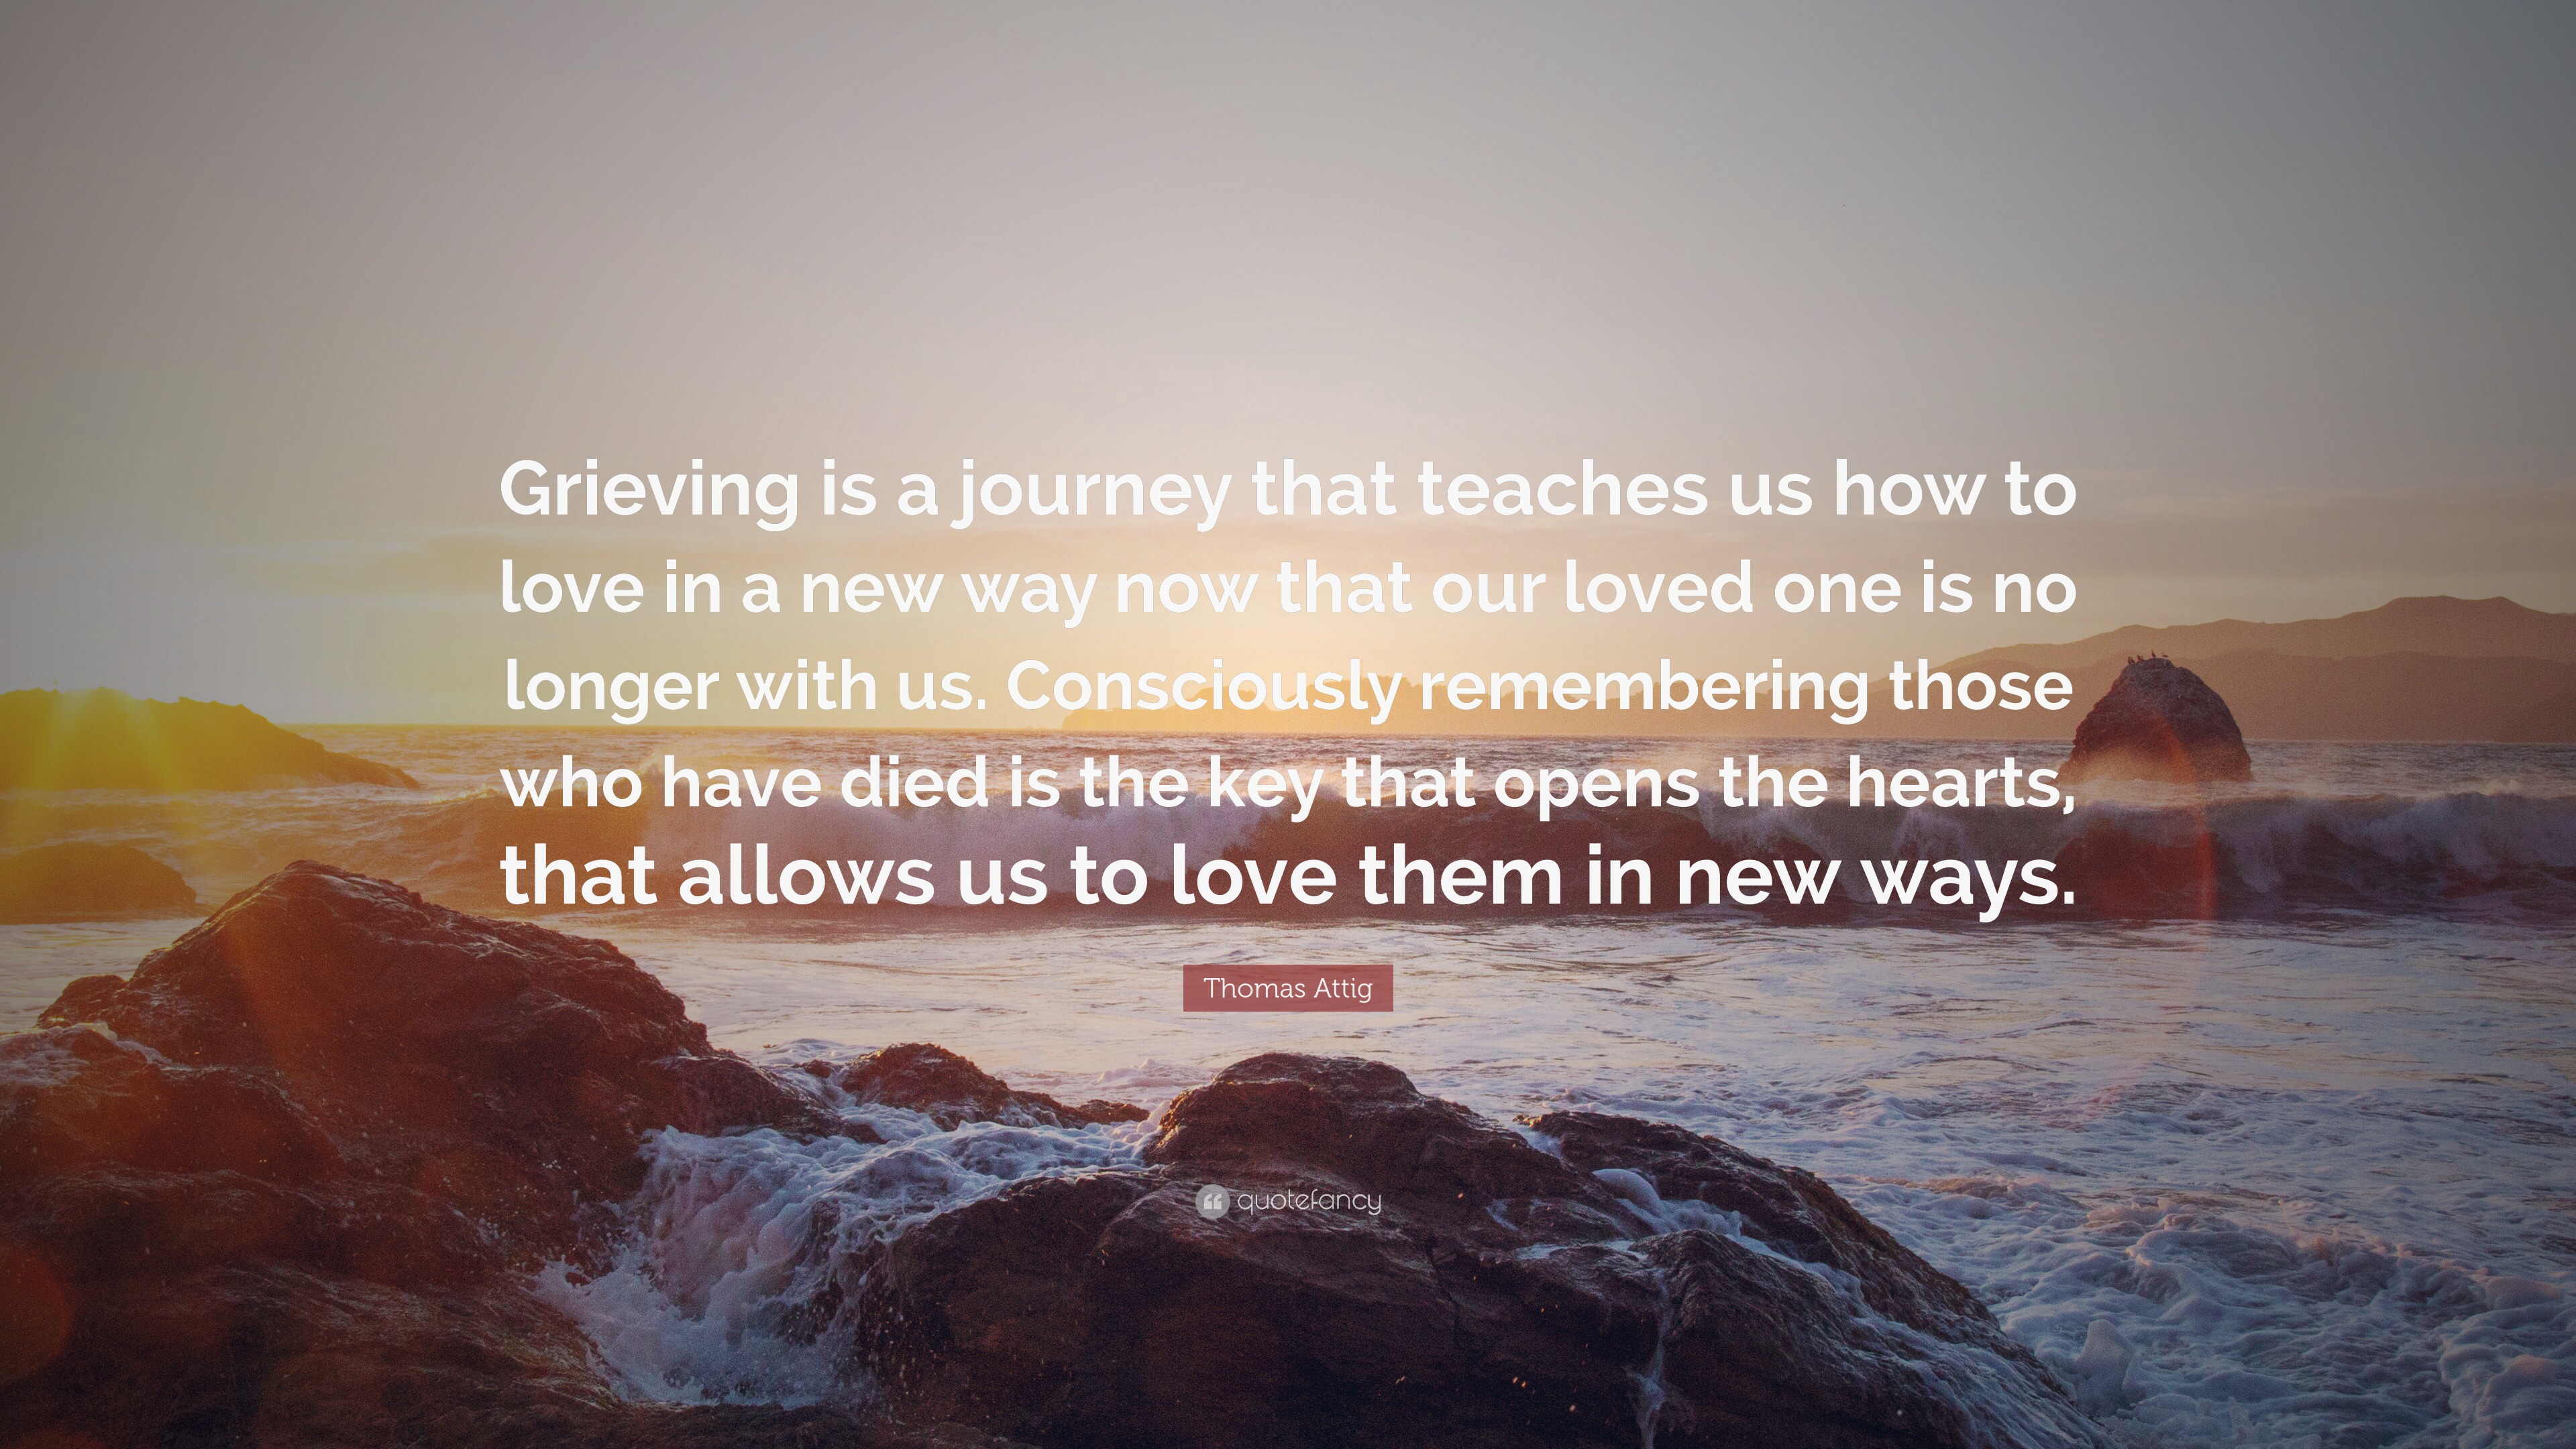 Thomas Attig Quote “Grieving is a journey that teaches us how to love in